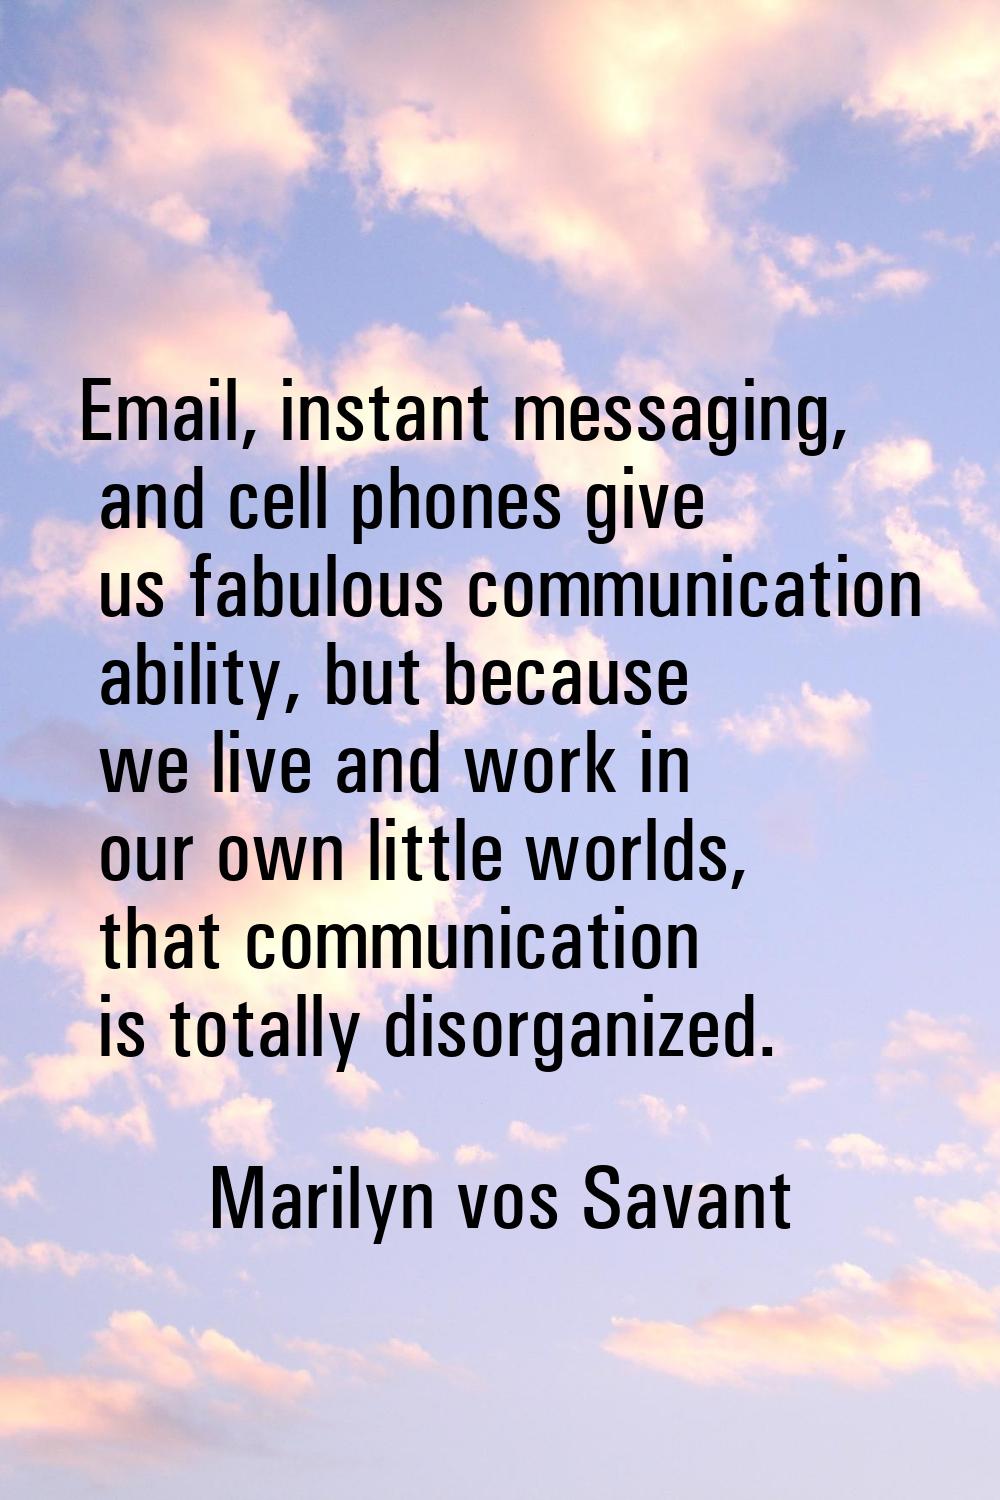 Email, instant messaging, and cell phones give us fabulous communication ability, but because we li